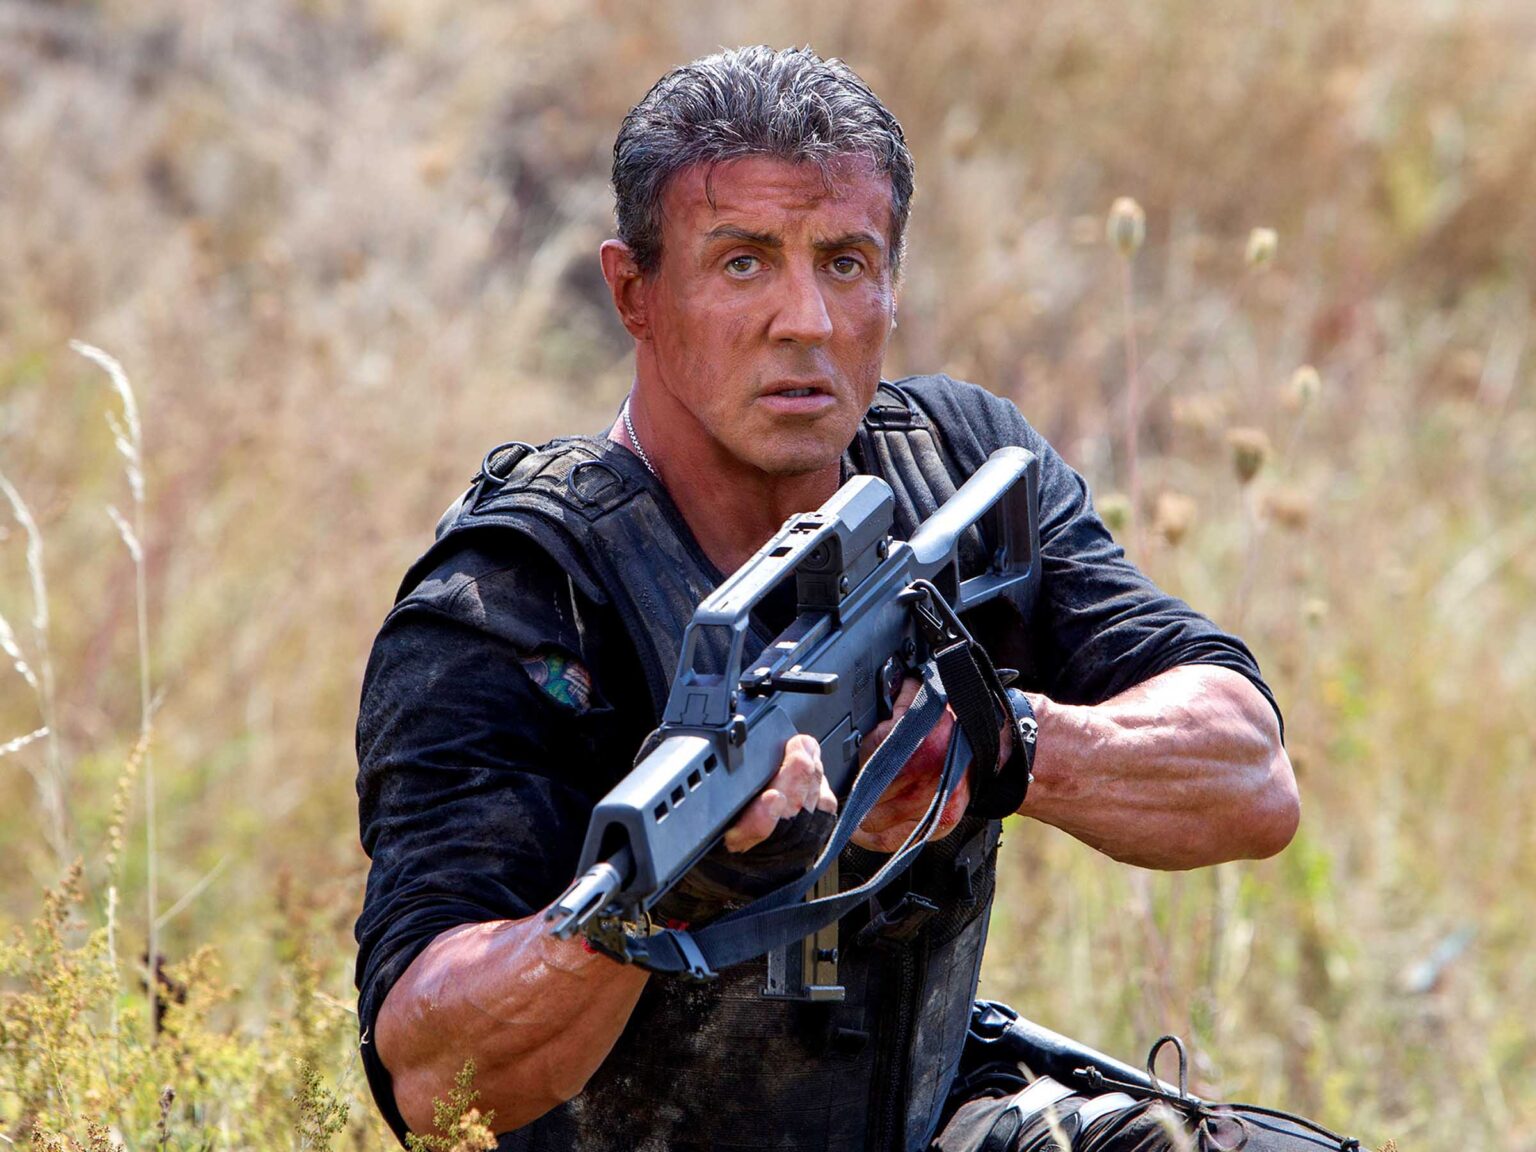 Some huge names have joined the cast for 'The Expendables 4'. Find out who and learn all the details about the upcoming action thriller here!